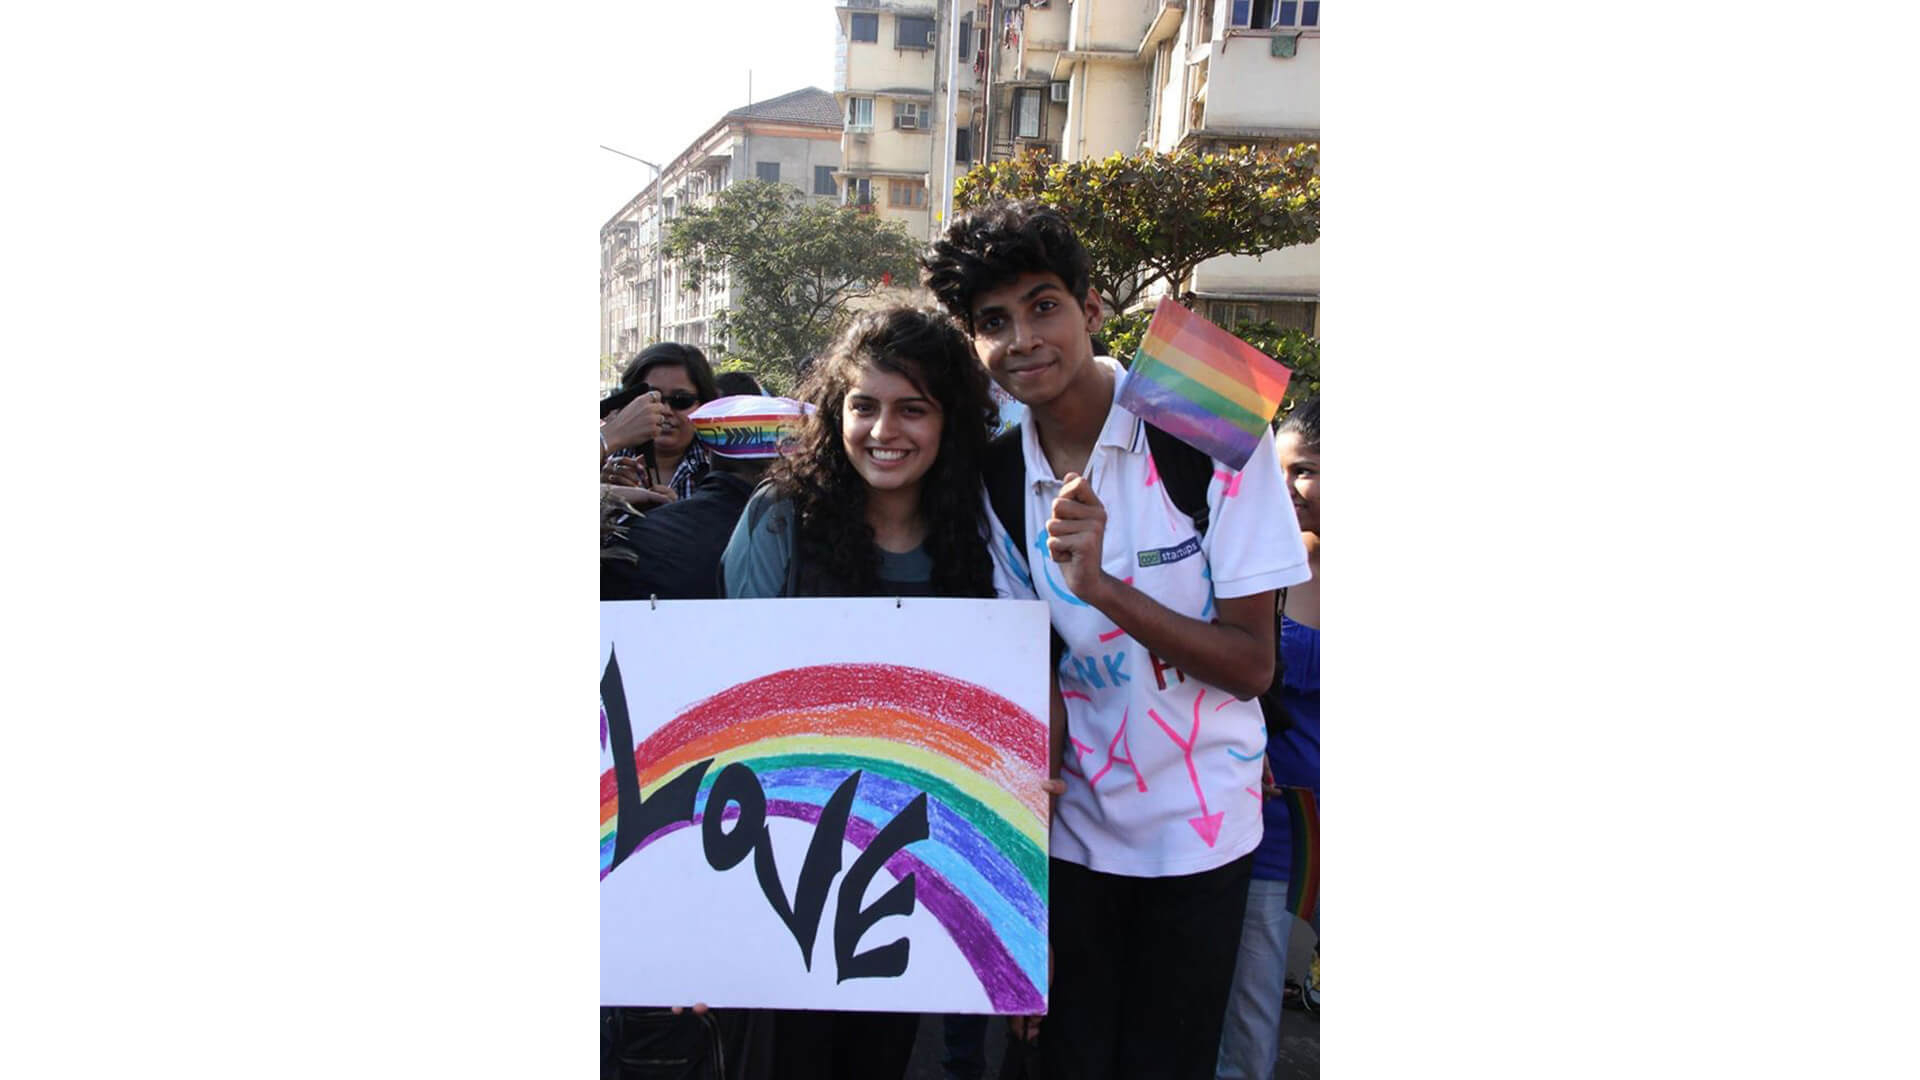 Mudit holding a rainbow flag at his first Pride parade, with his friend Drishti.